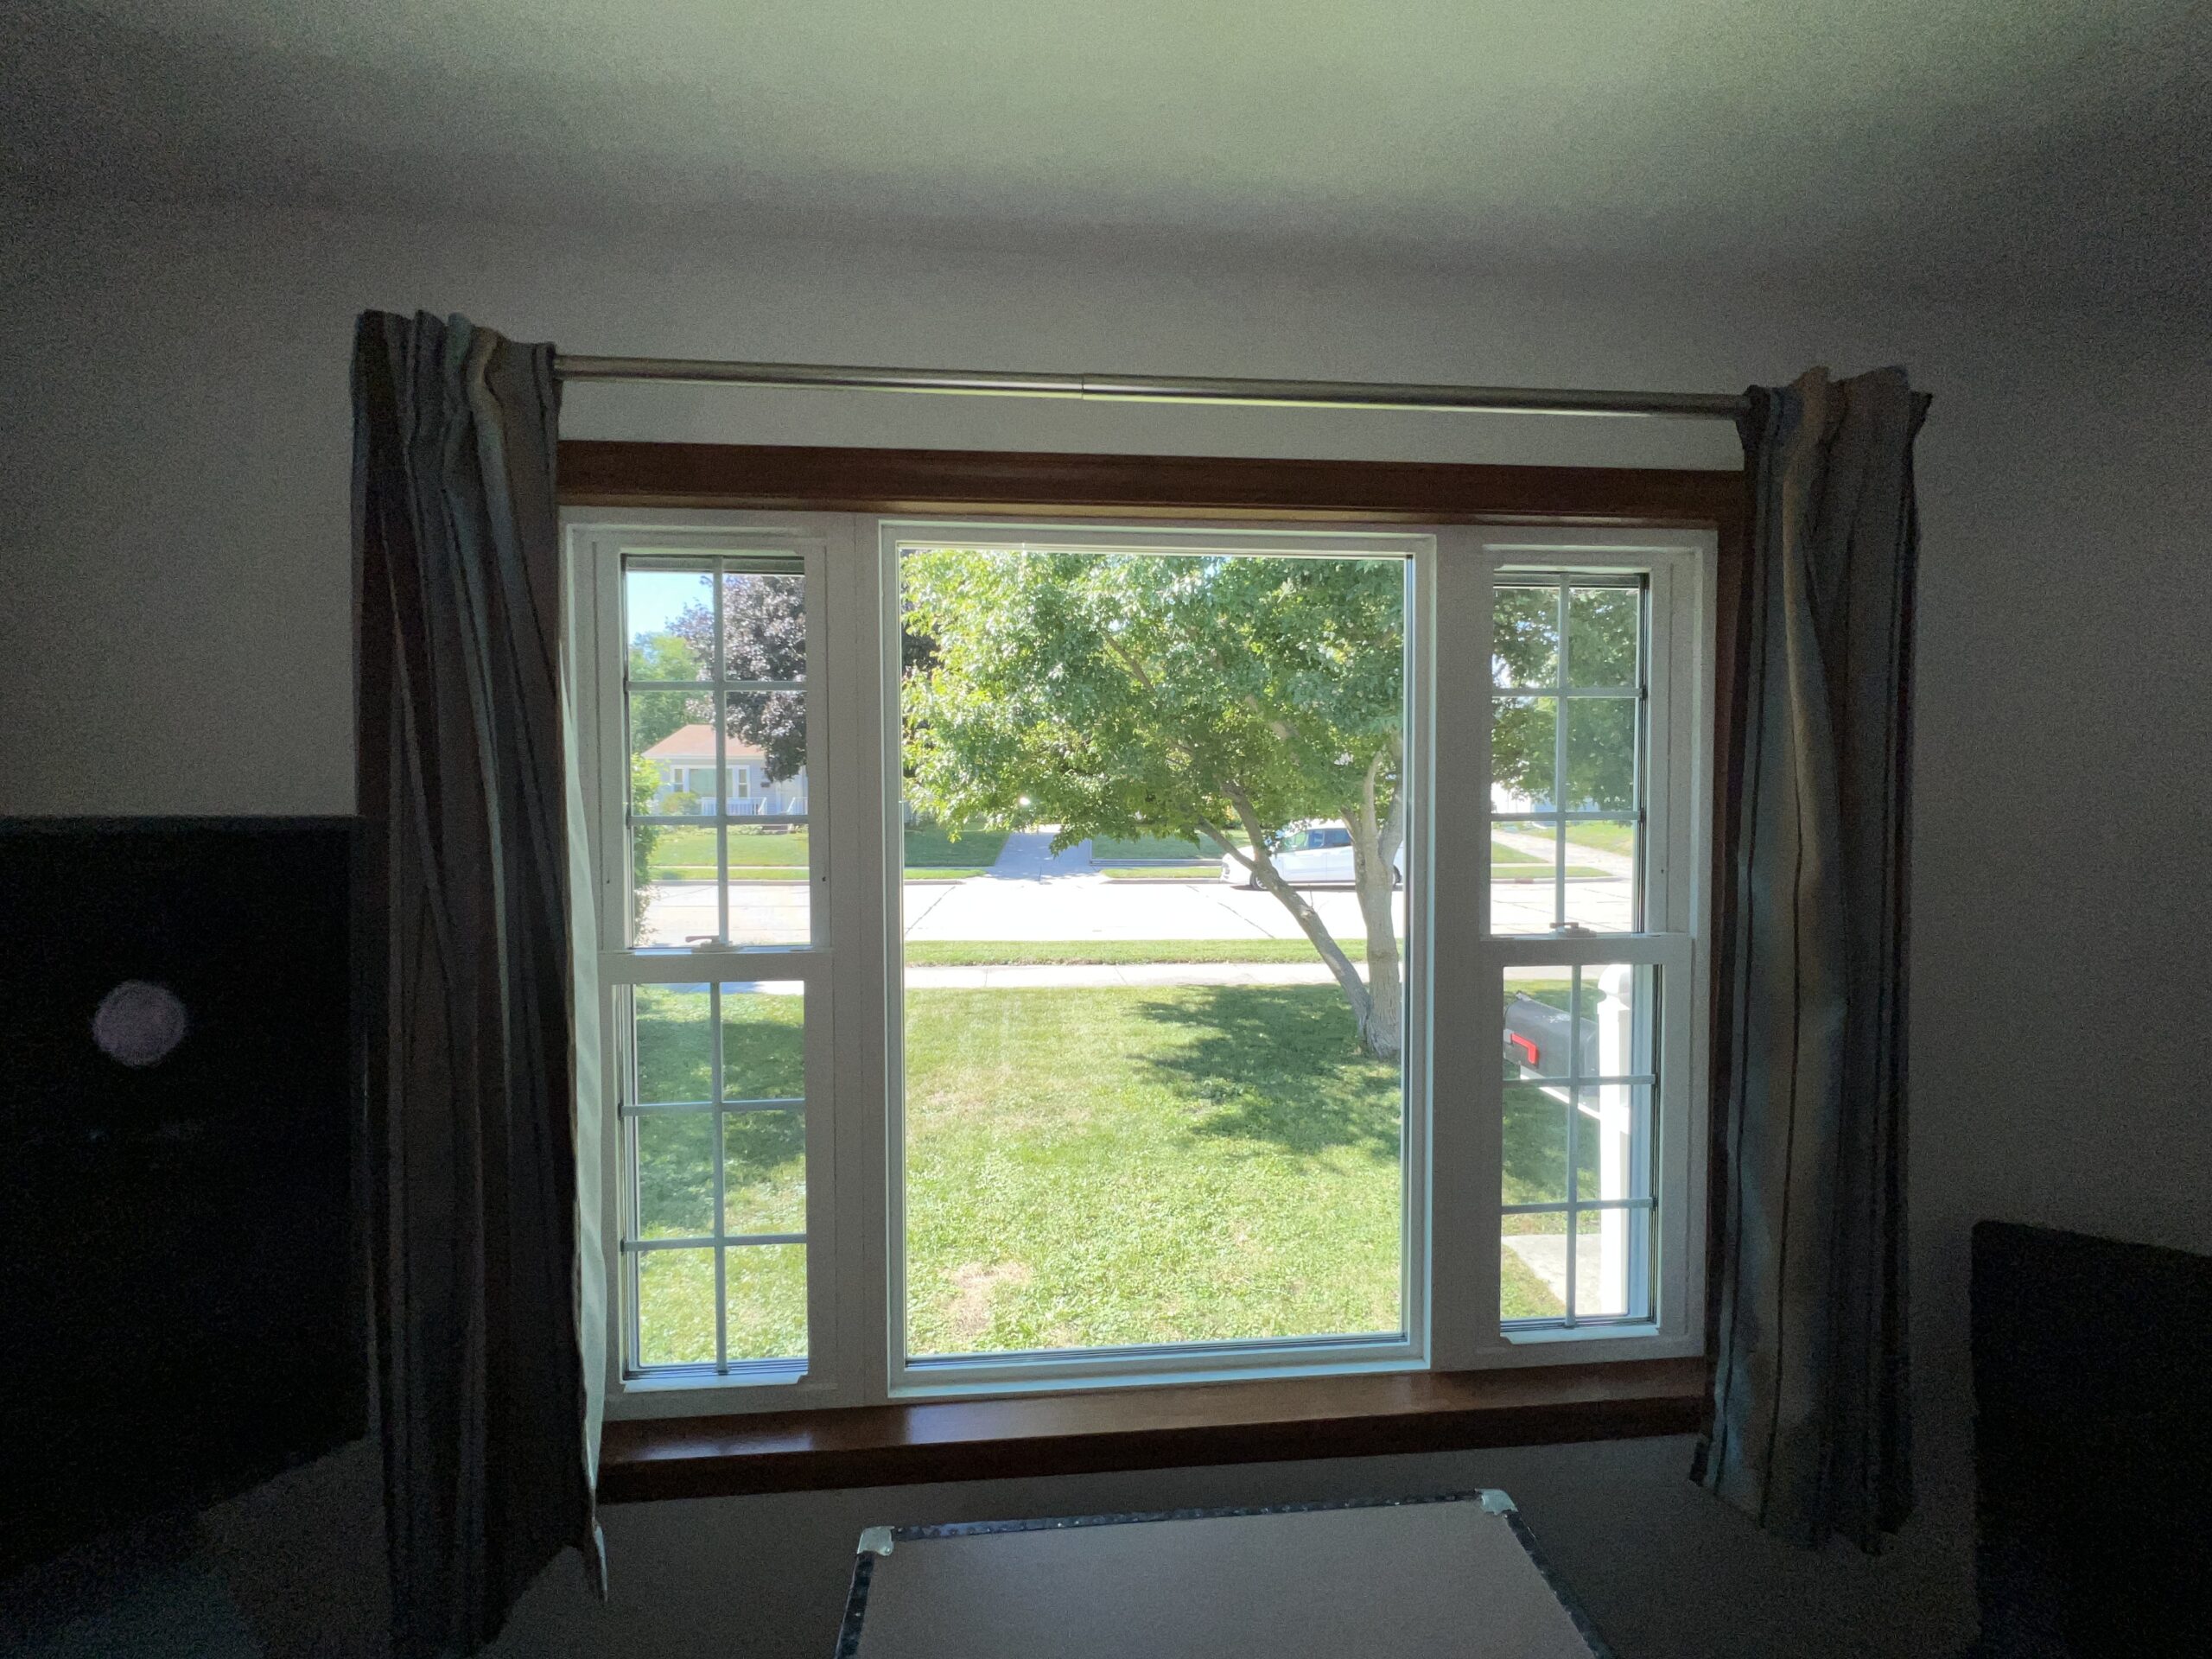 Triple window, single pane in center with curtains